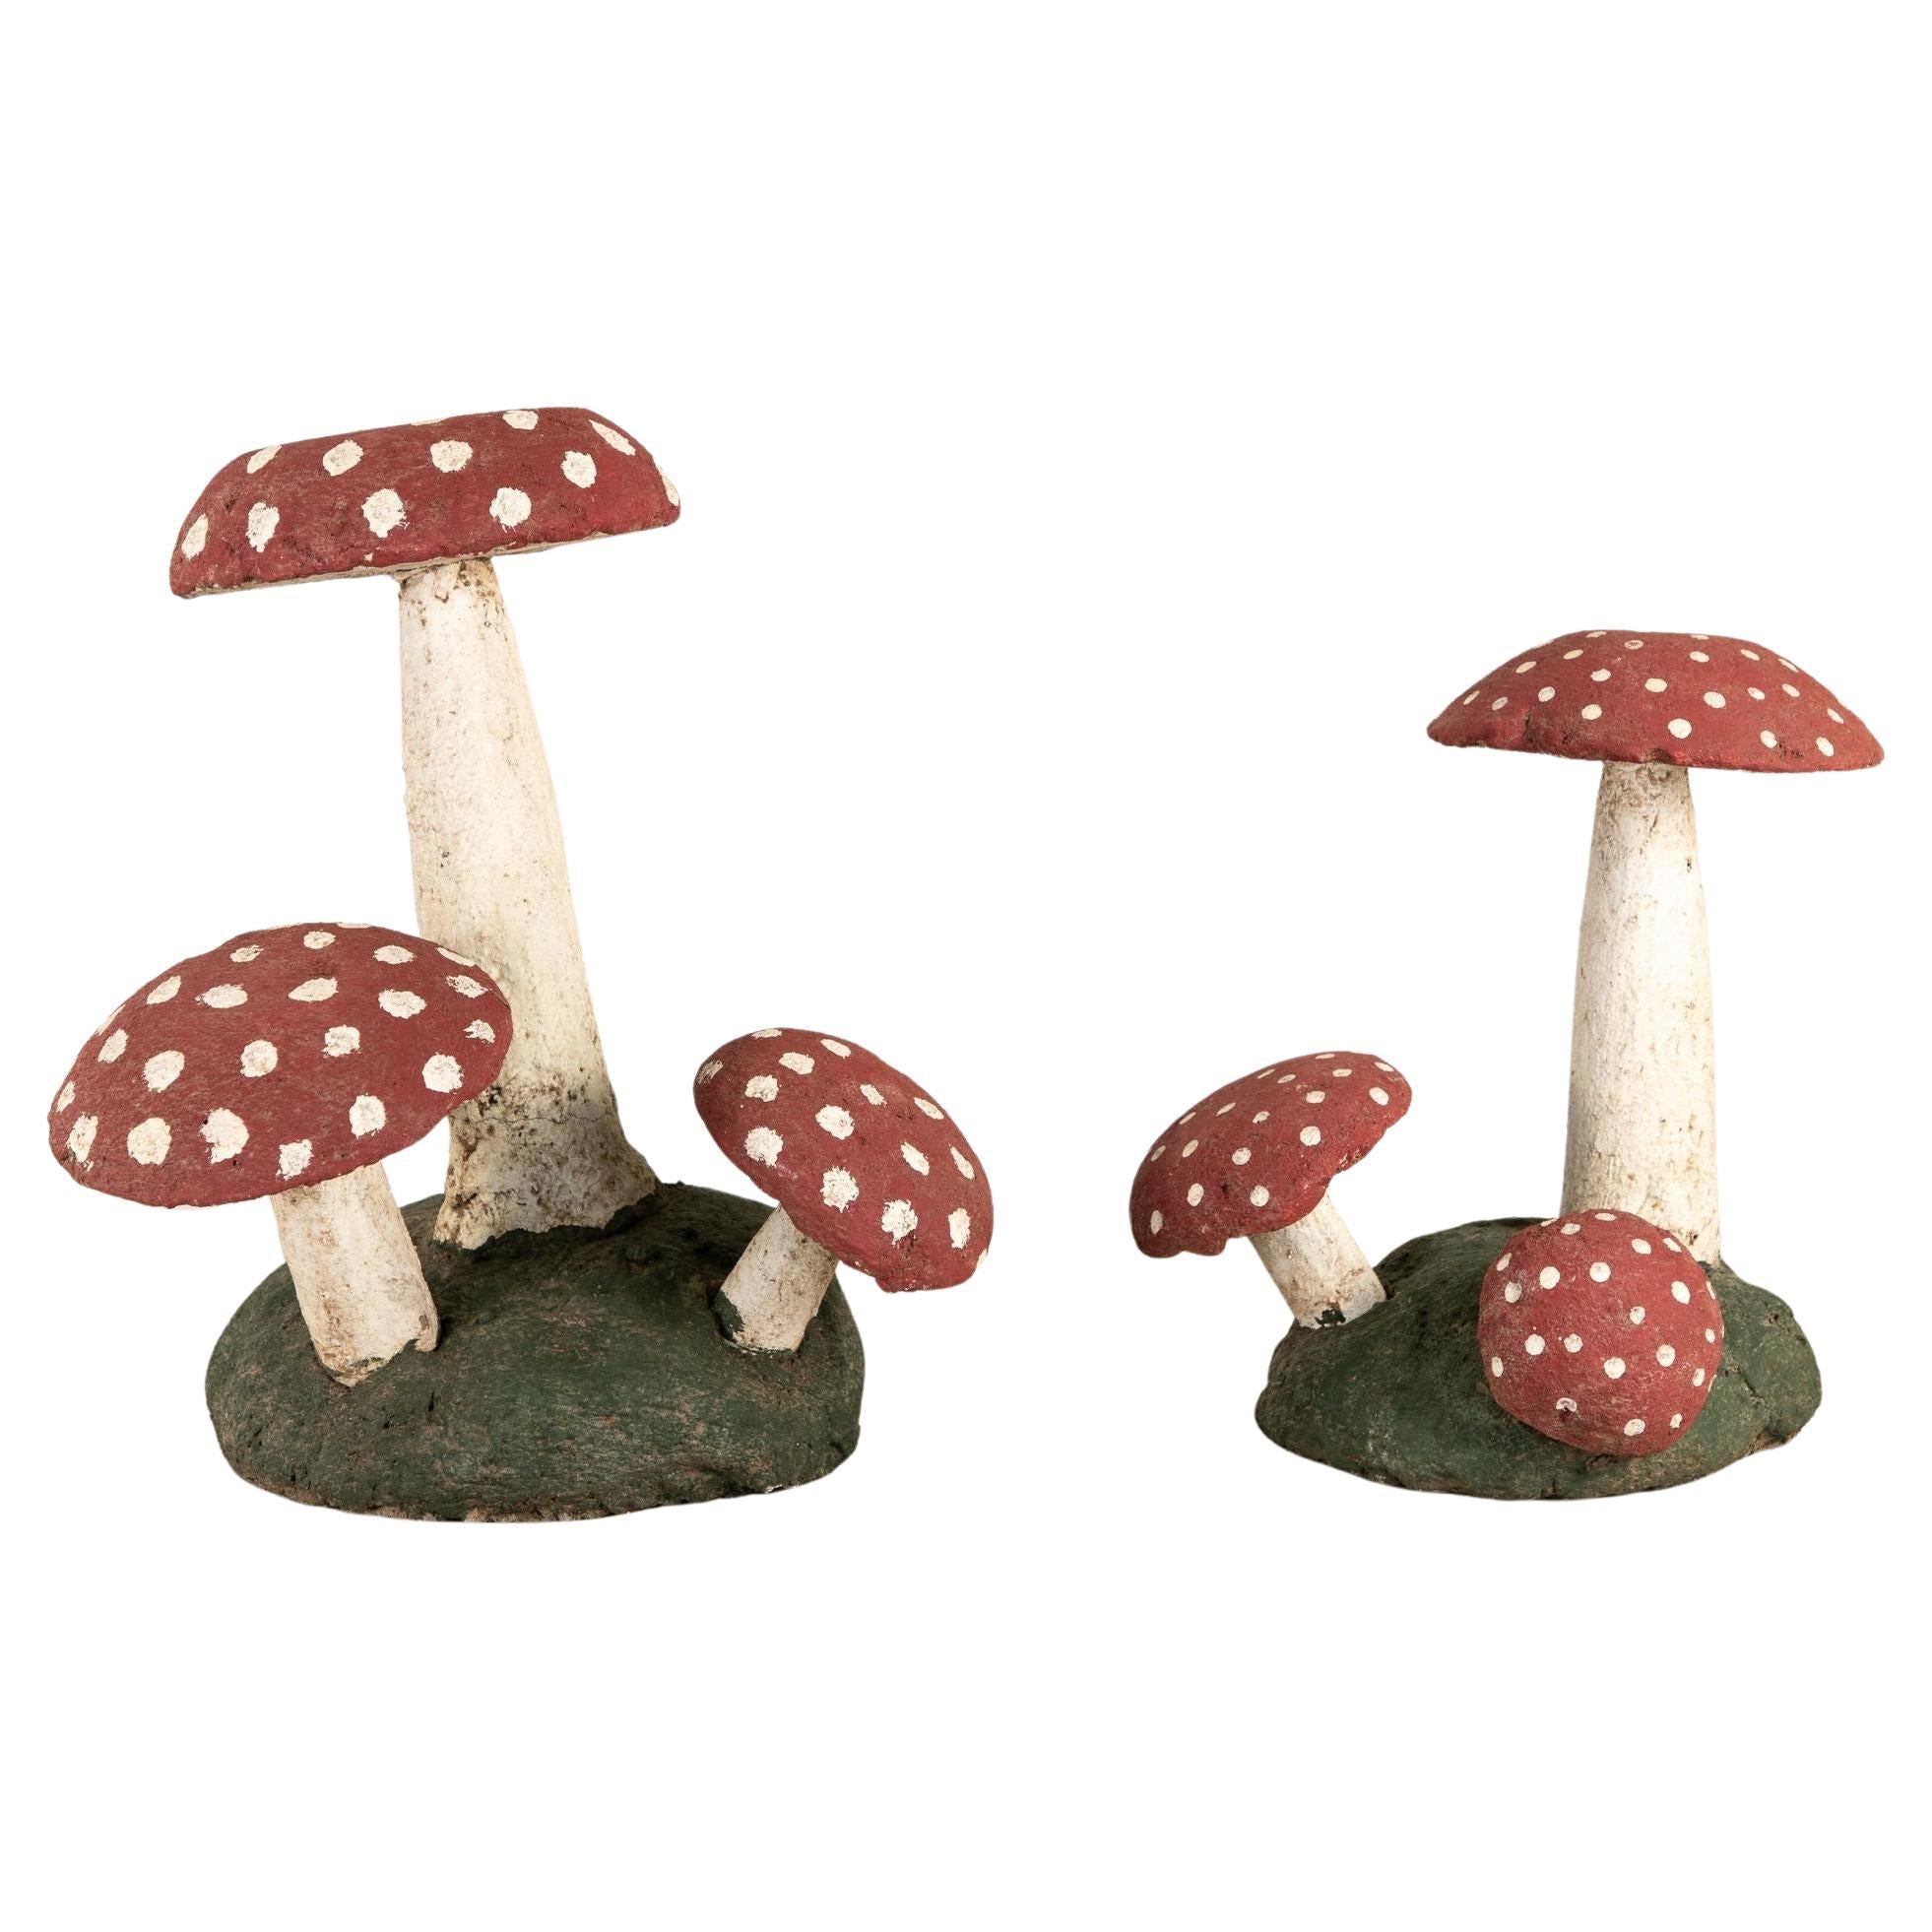 Pair Cast Stone Mushrooms with Red, Green, and White Paint, 20th Century